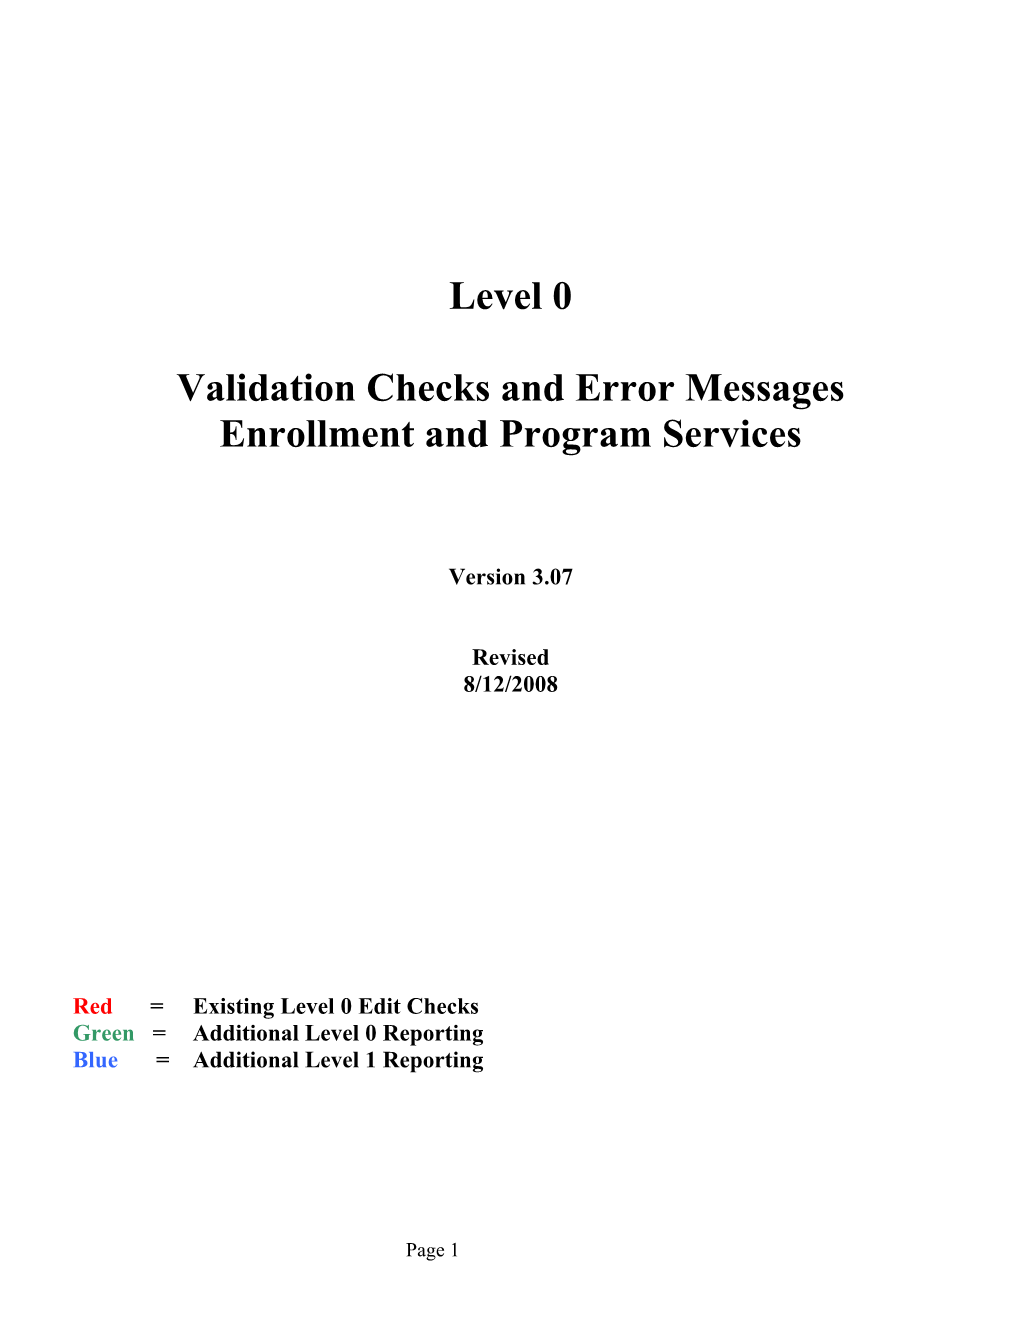 Validation Checks and Error Messages